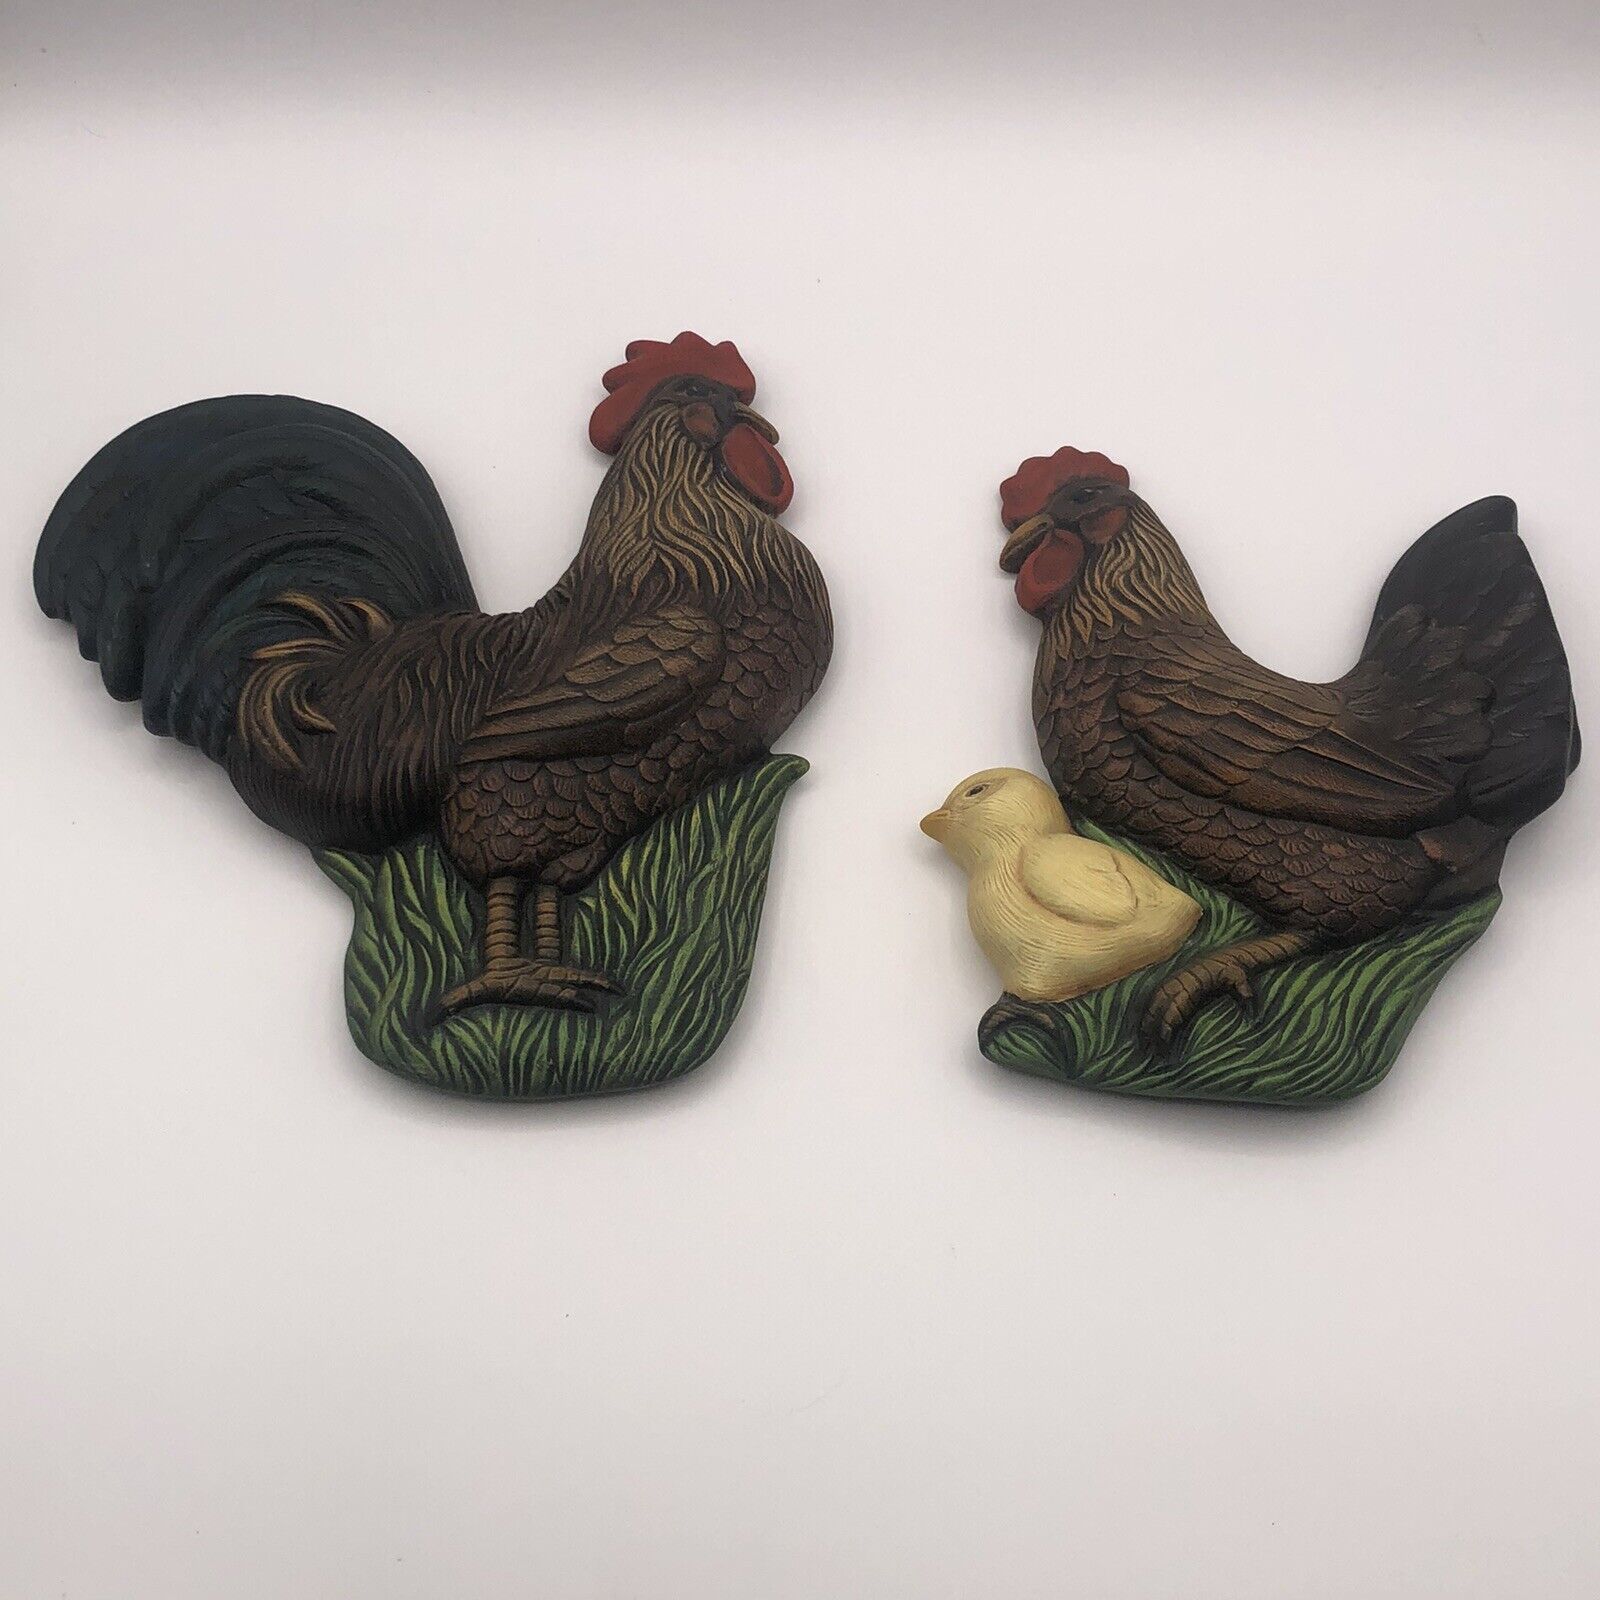 Rooster Chicken Hobbyist Wall Decor Nicely Done Ceramic Pieces Signed 1995 Vint